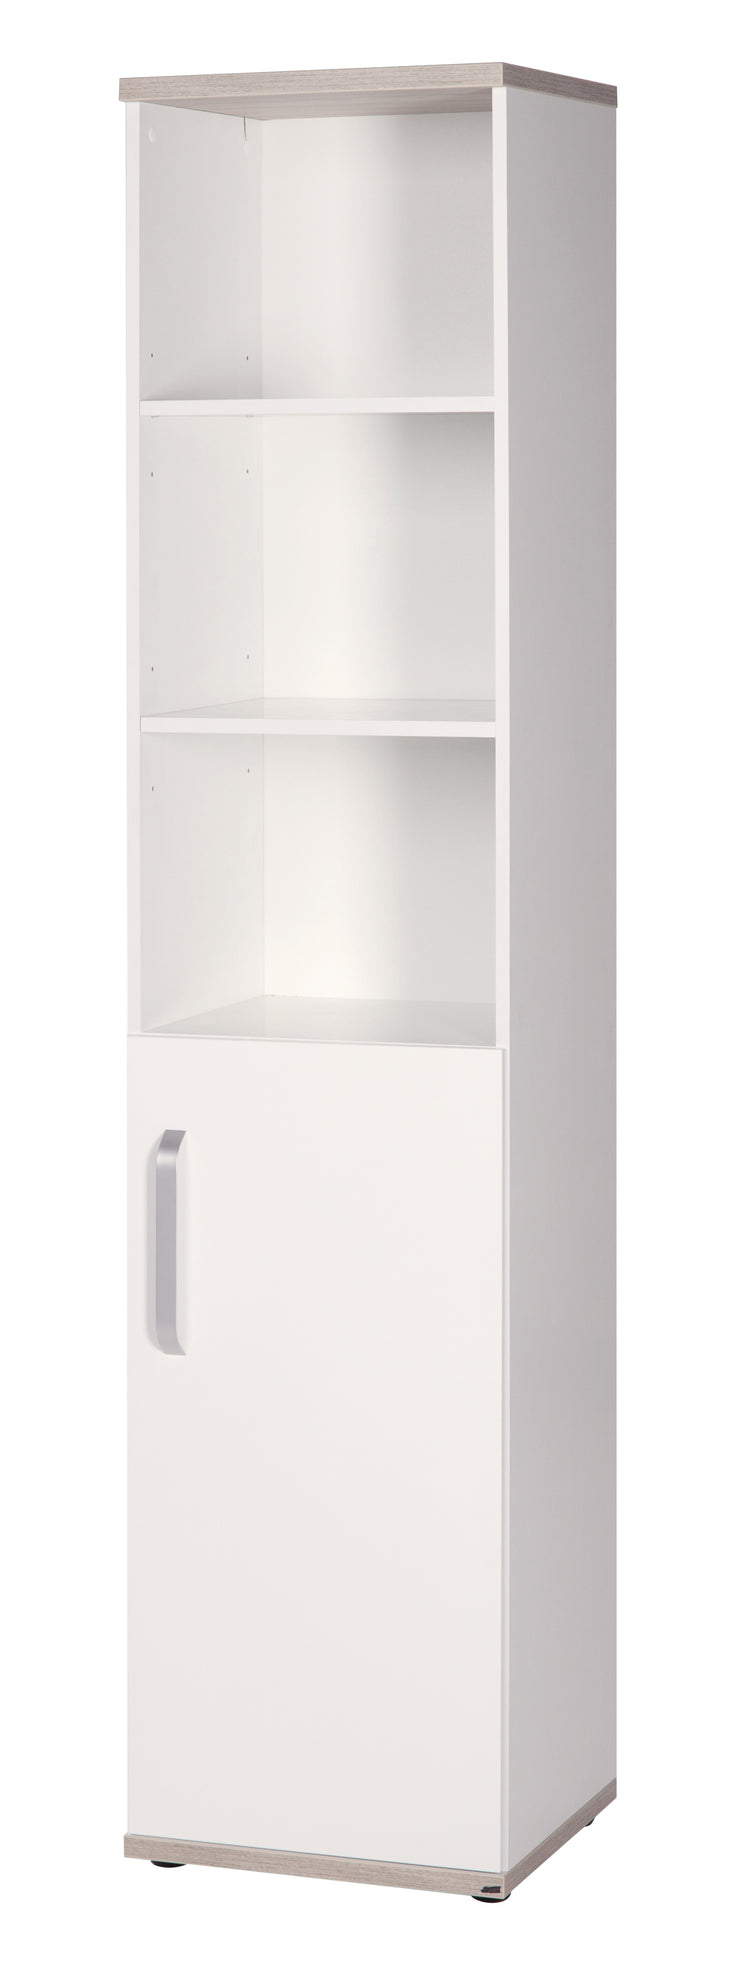 Stand shelf 'Moritz', body & fronts white, decorative elements 'Luna Elm', for baby and children's rooms